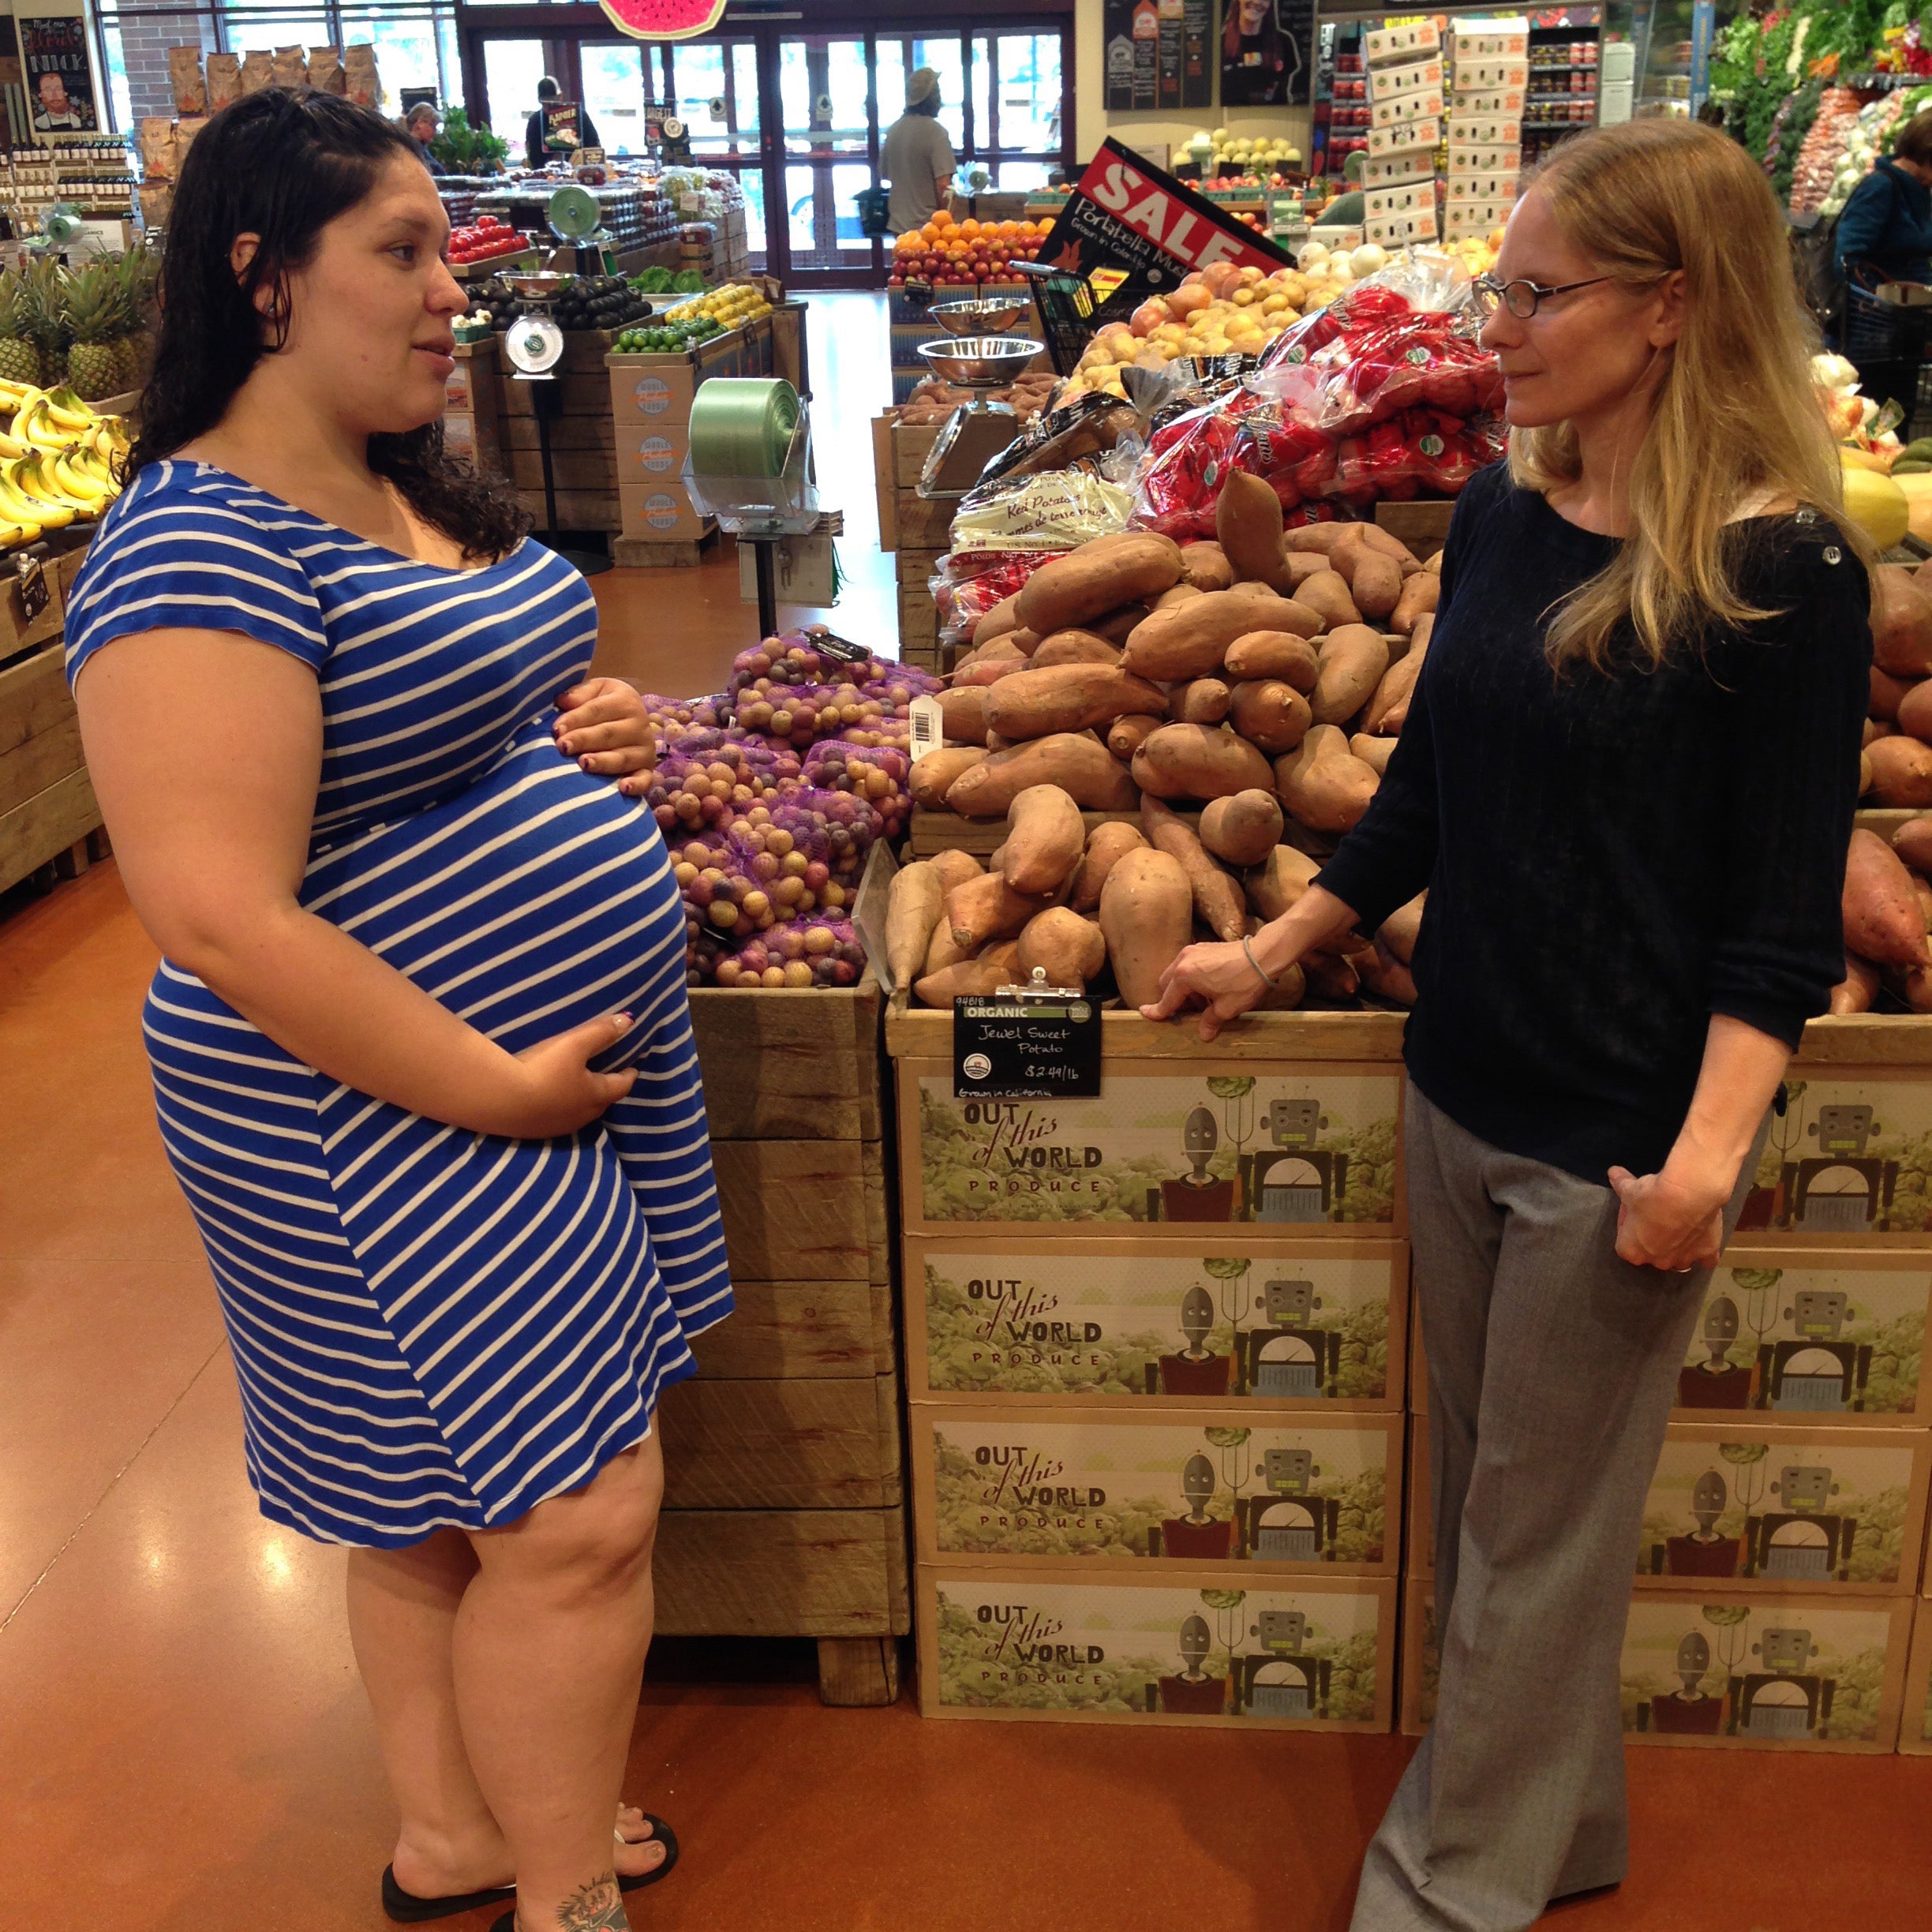 Cynthia Curl (right) discusses her study with Taylor Barrera-Lopez in the produce section of a local grocery store.